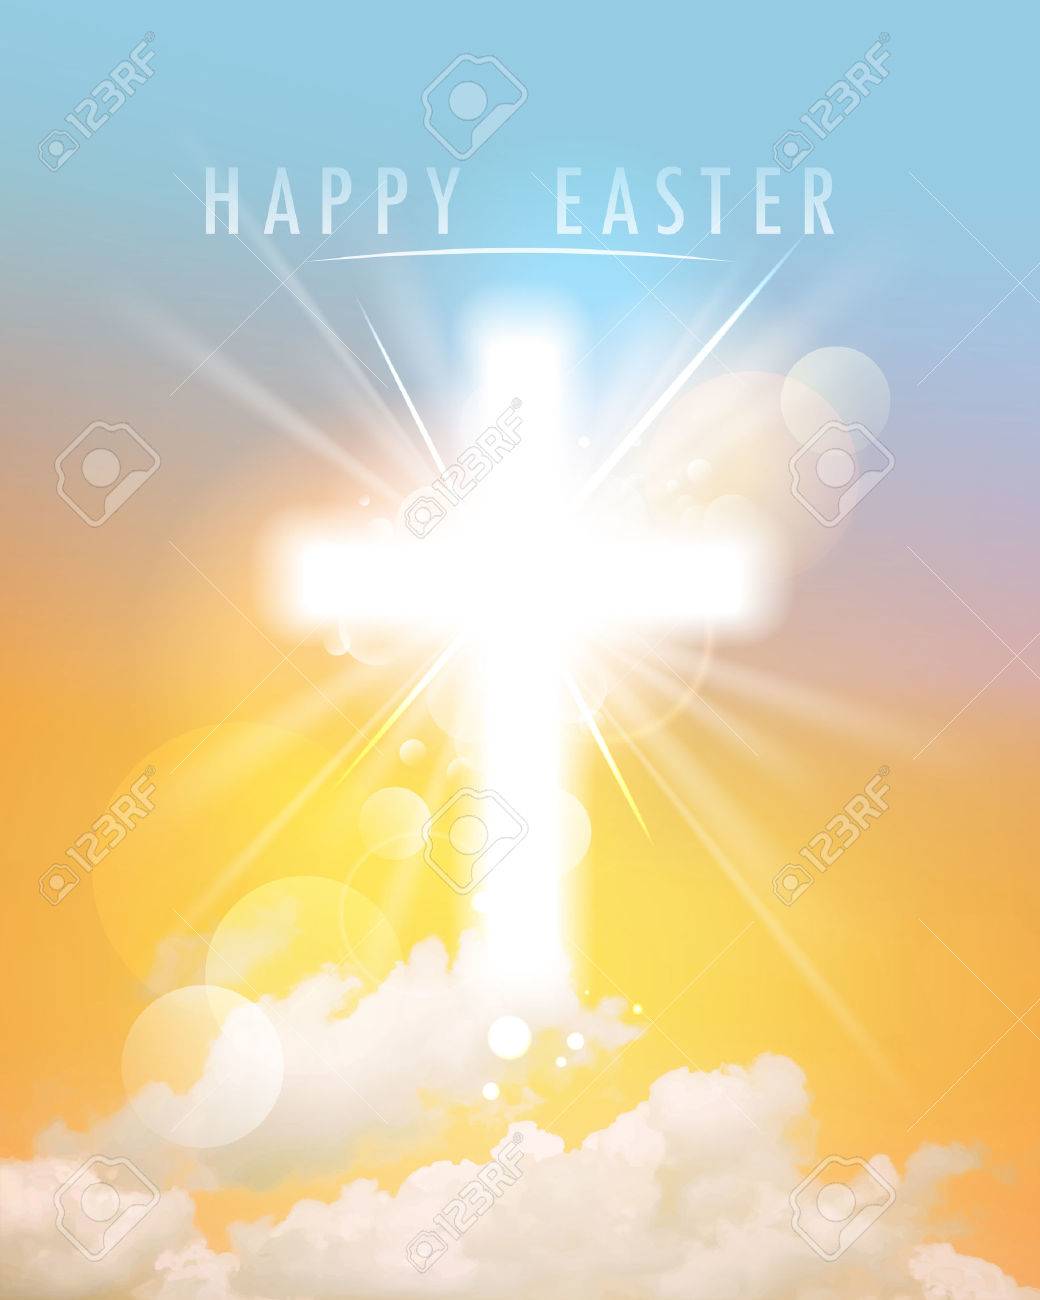 Abstract Happy Easter Background With Shining Cross Sky And